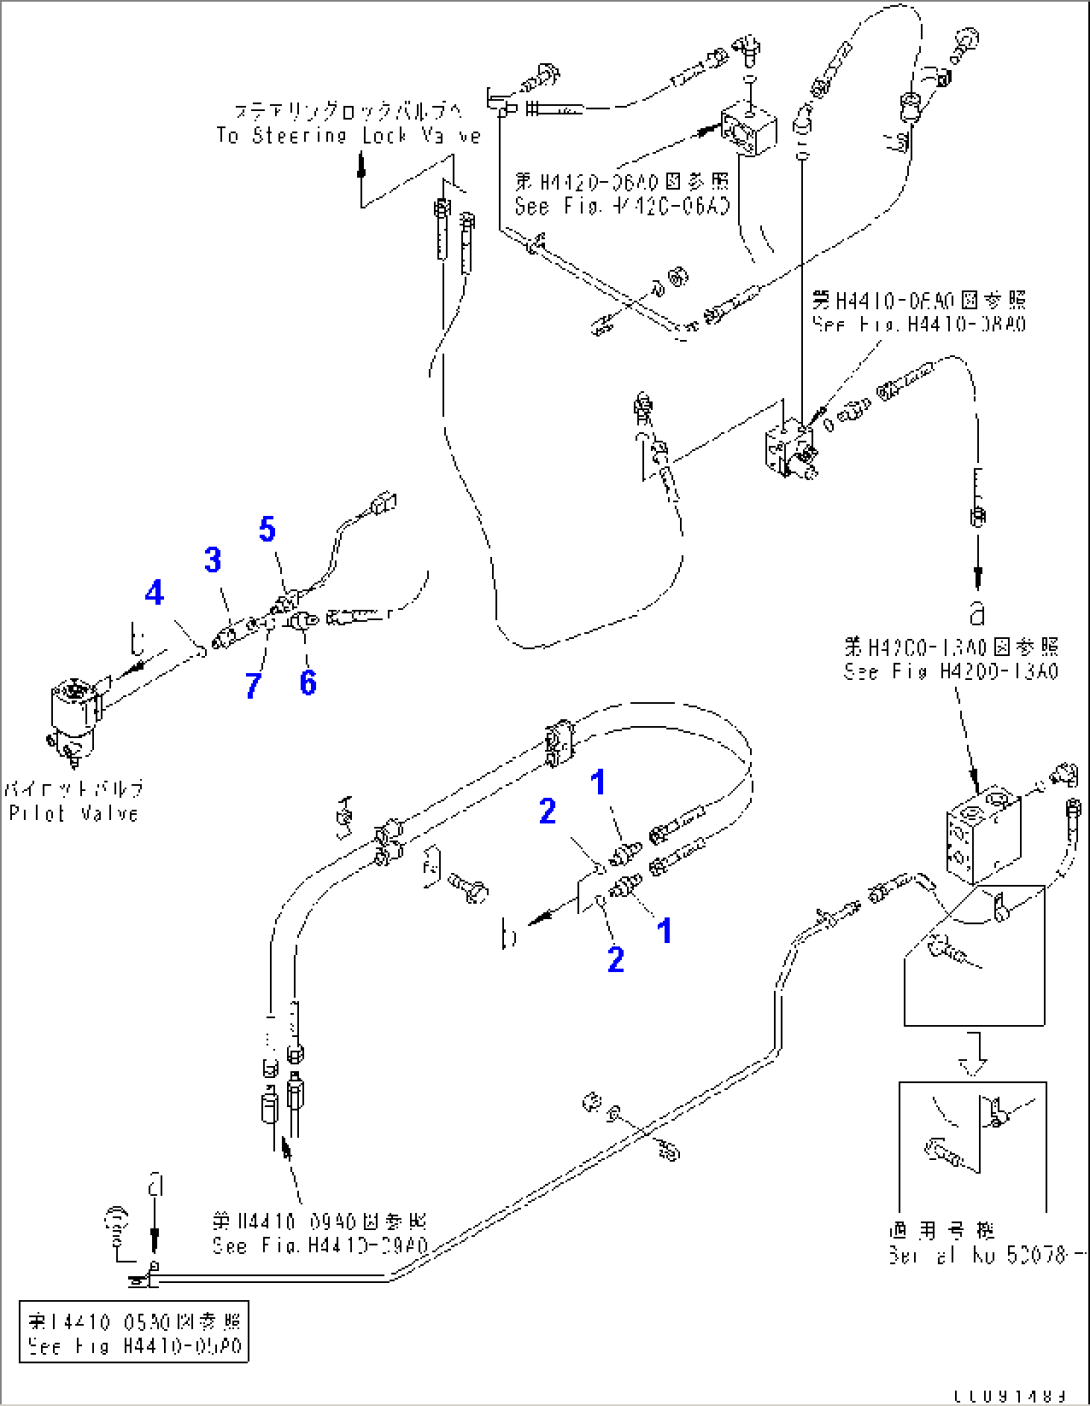 OPERATOR AREA (STEERING LEVER AND TRANSMISSION CONTROL) (PILOT VALVE CONTROL LINE)(#50079-)